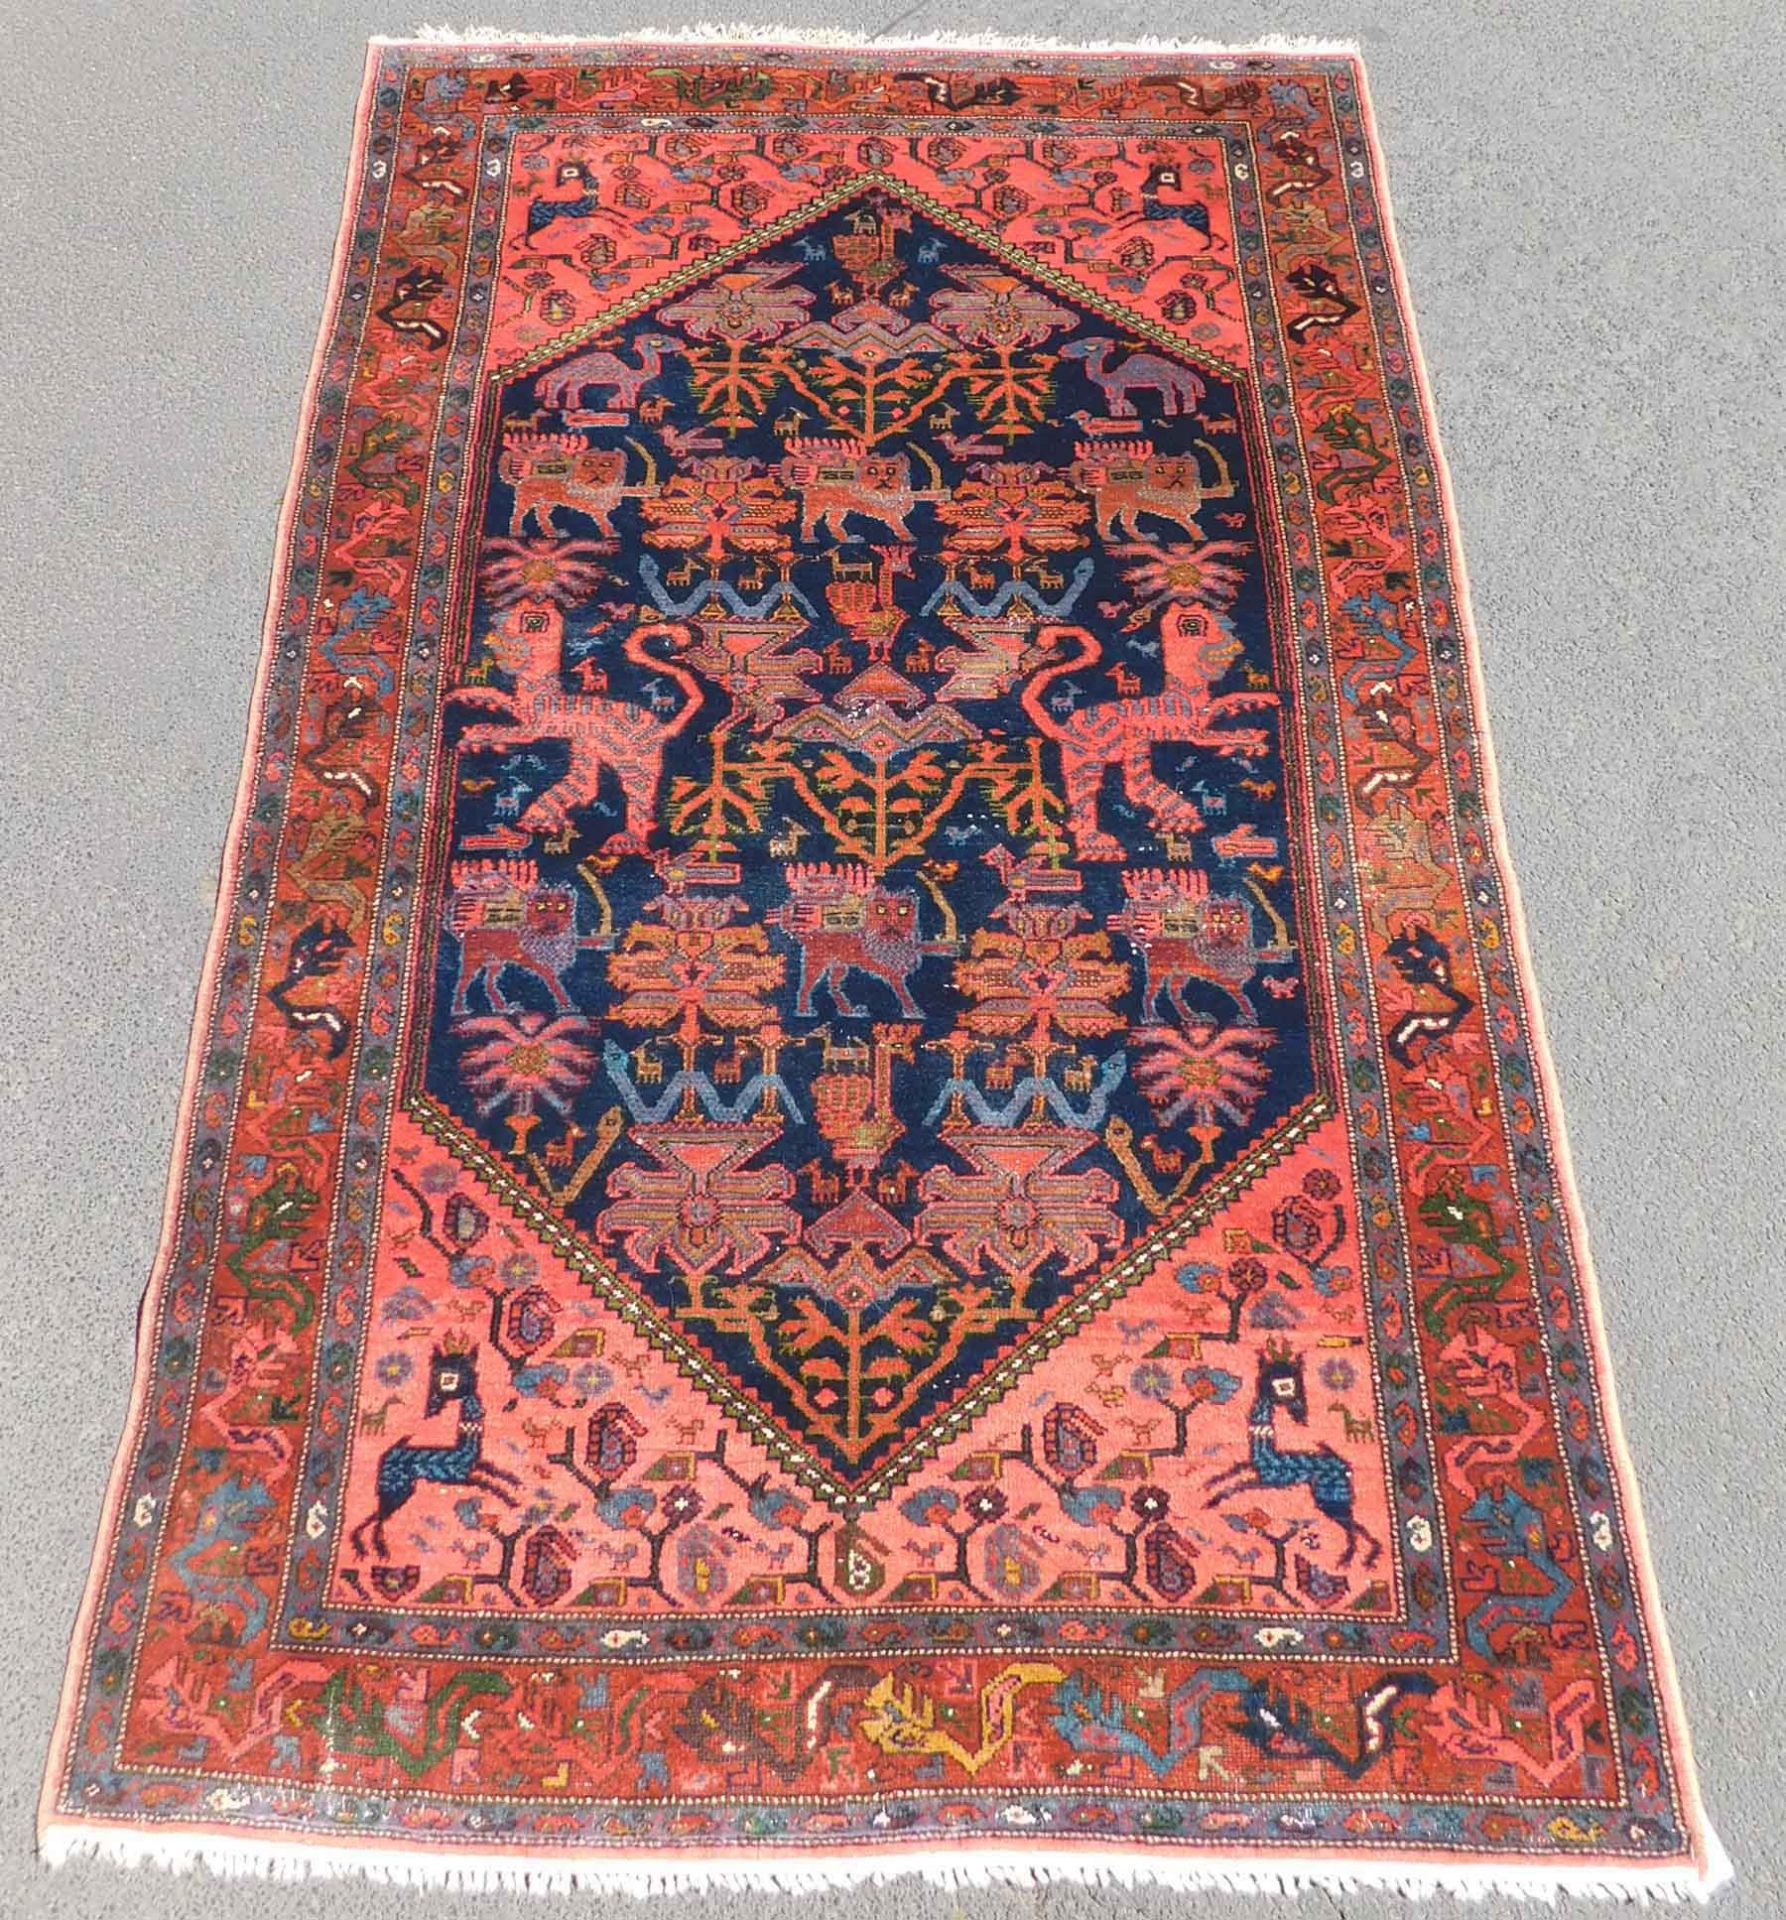 Nahawand Persian rug. Iran. Old. 1st Half of the 20th century.197 cm x 130 cm. Knotted by hand. Wool